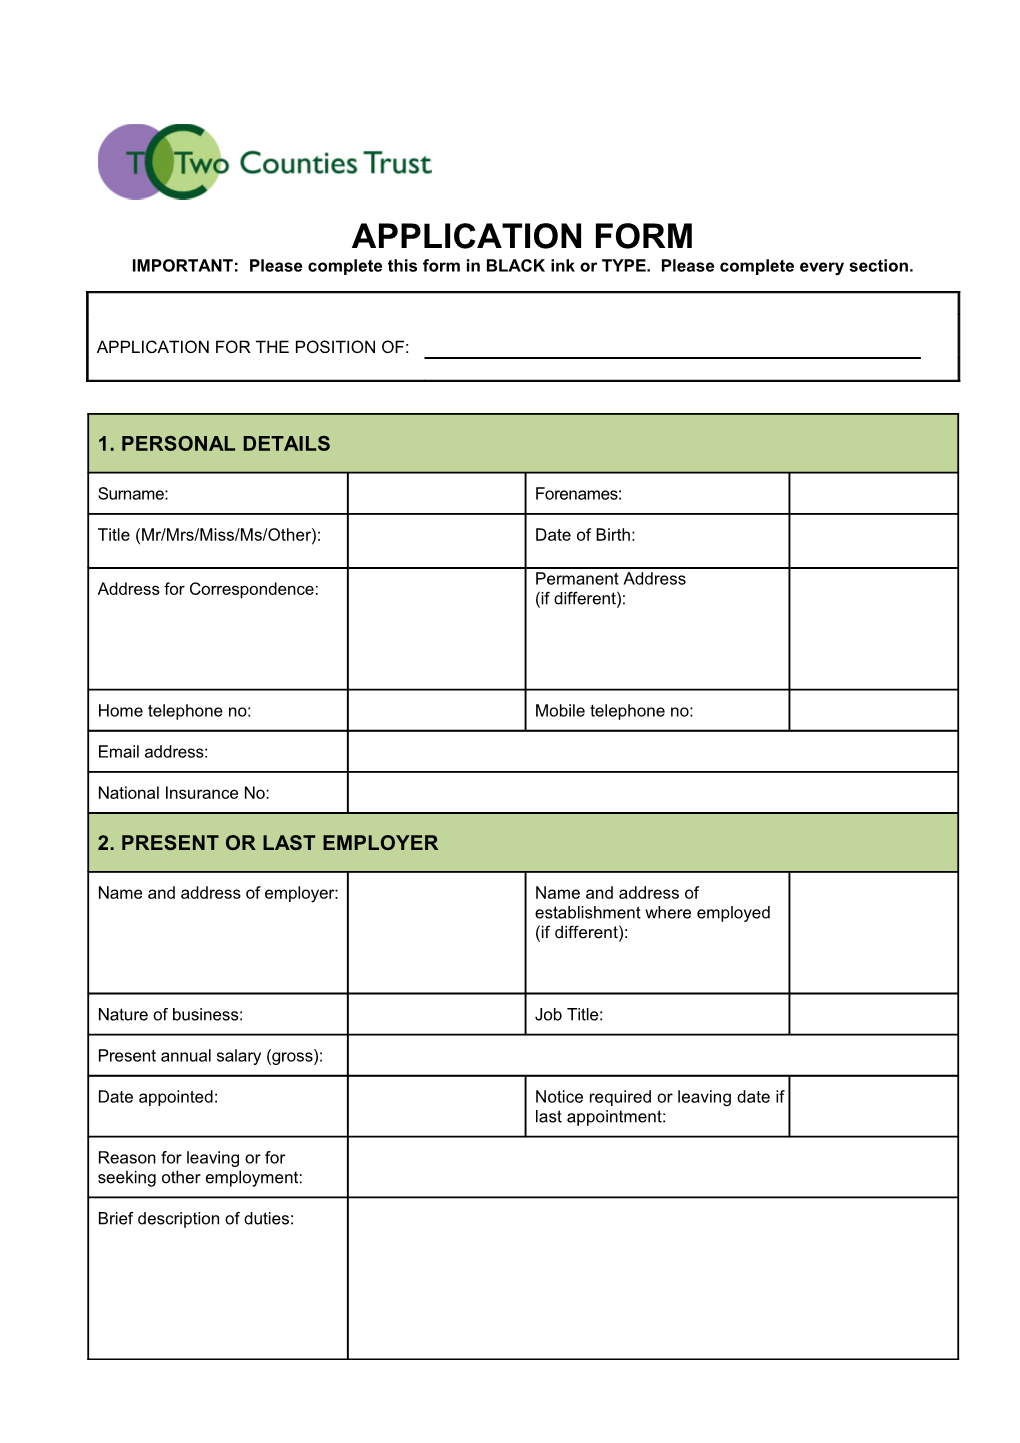 IMPORTANT: Please Complete This Form in BLACK Ink Or TYPE. Please Complete Every Section